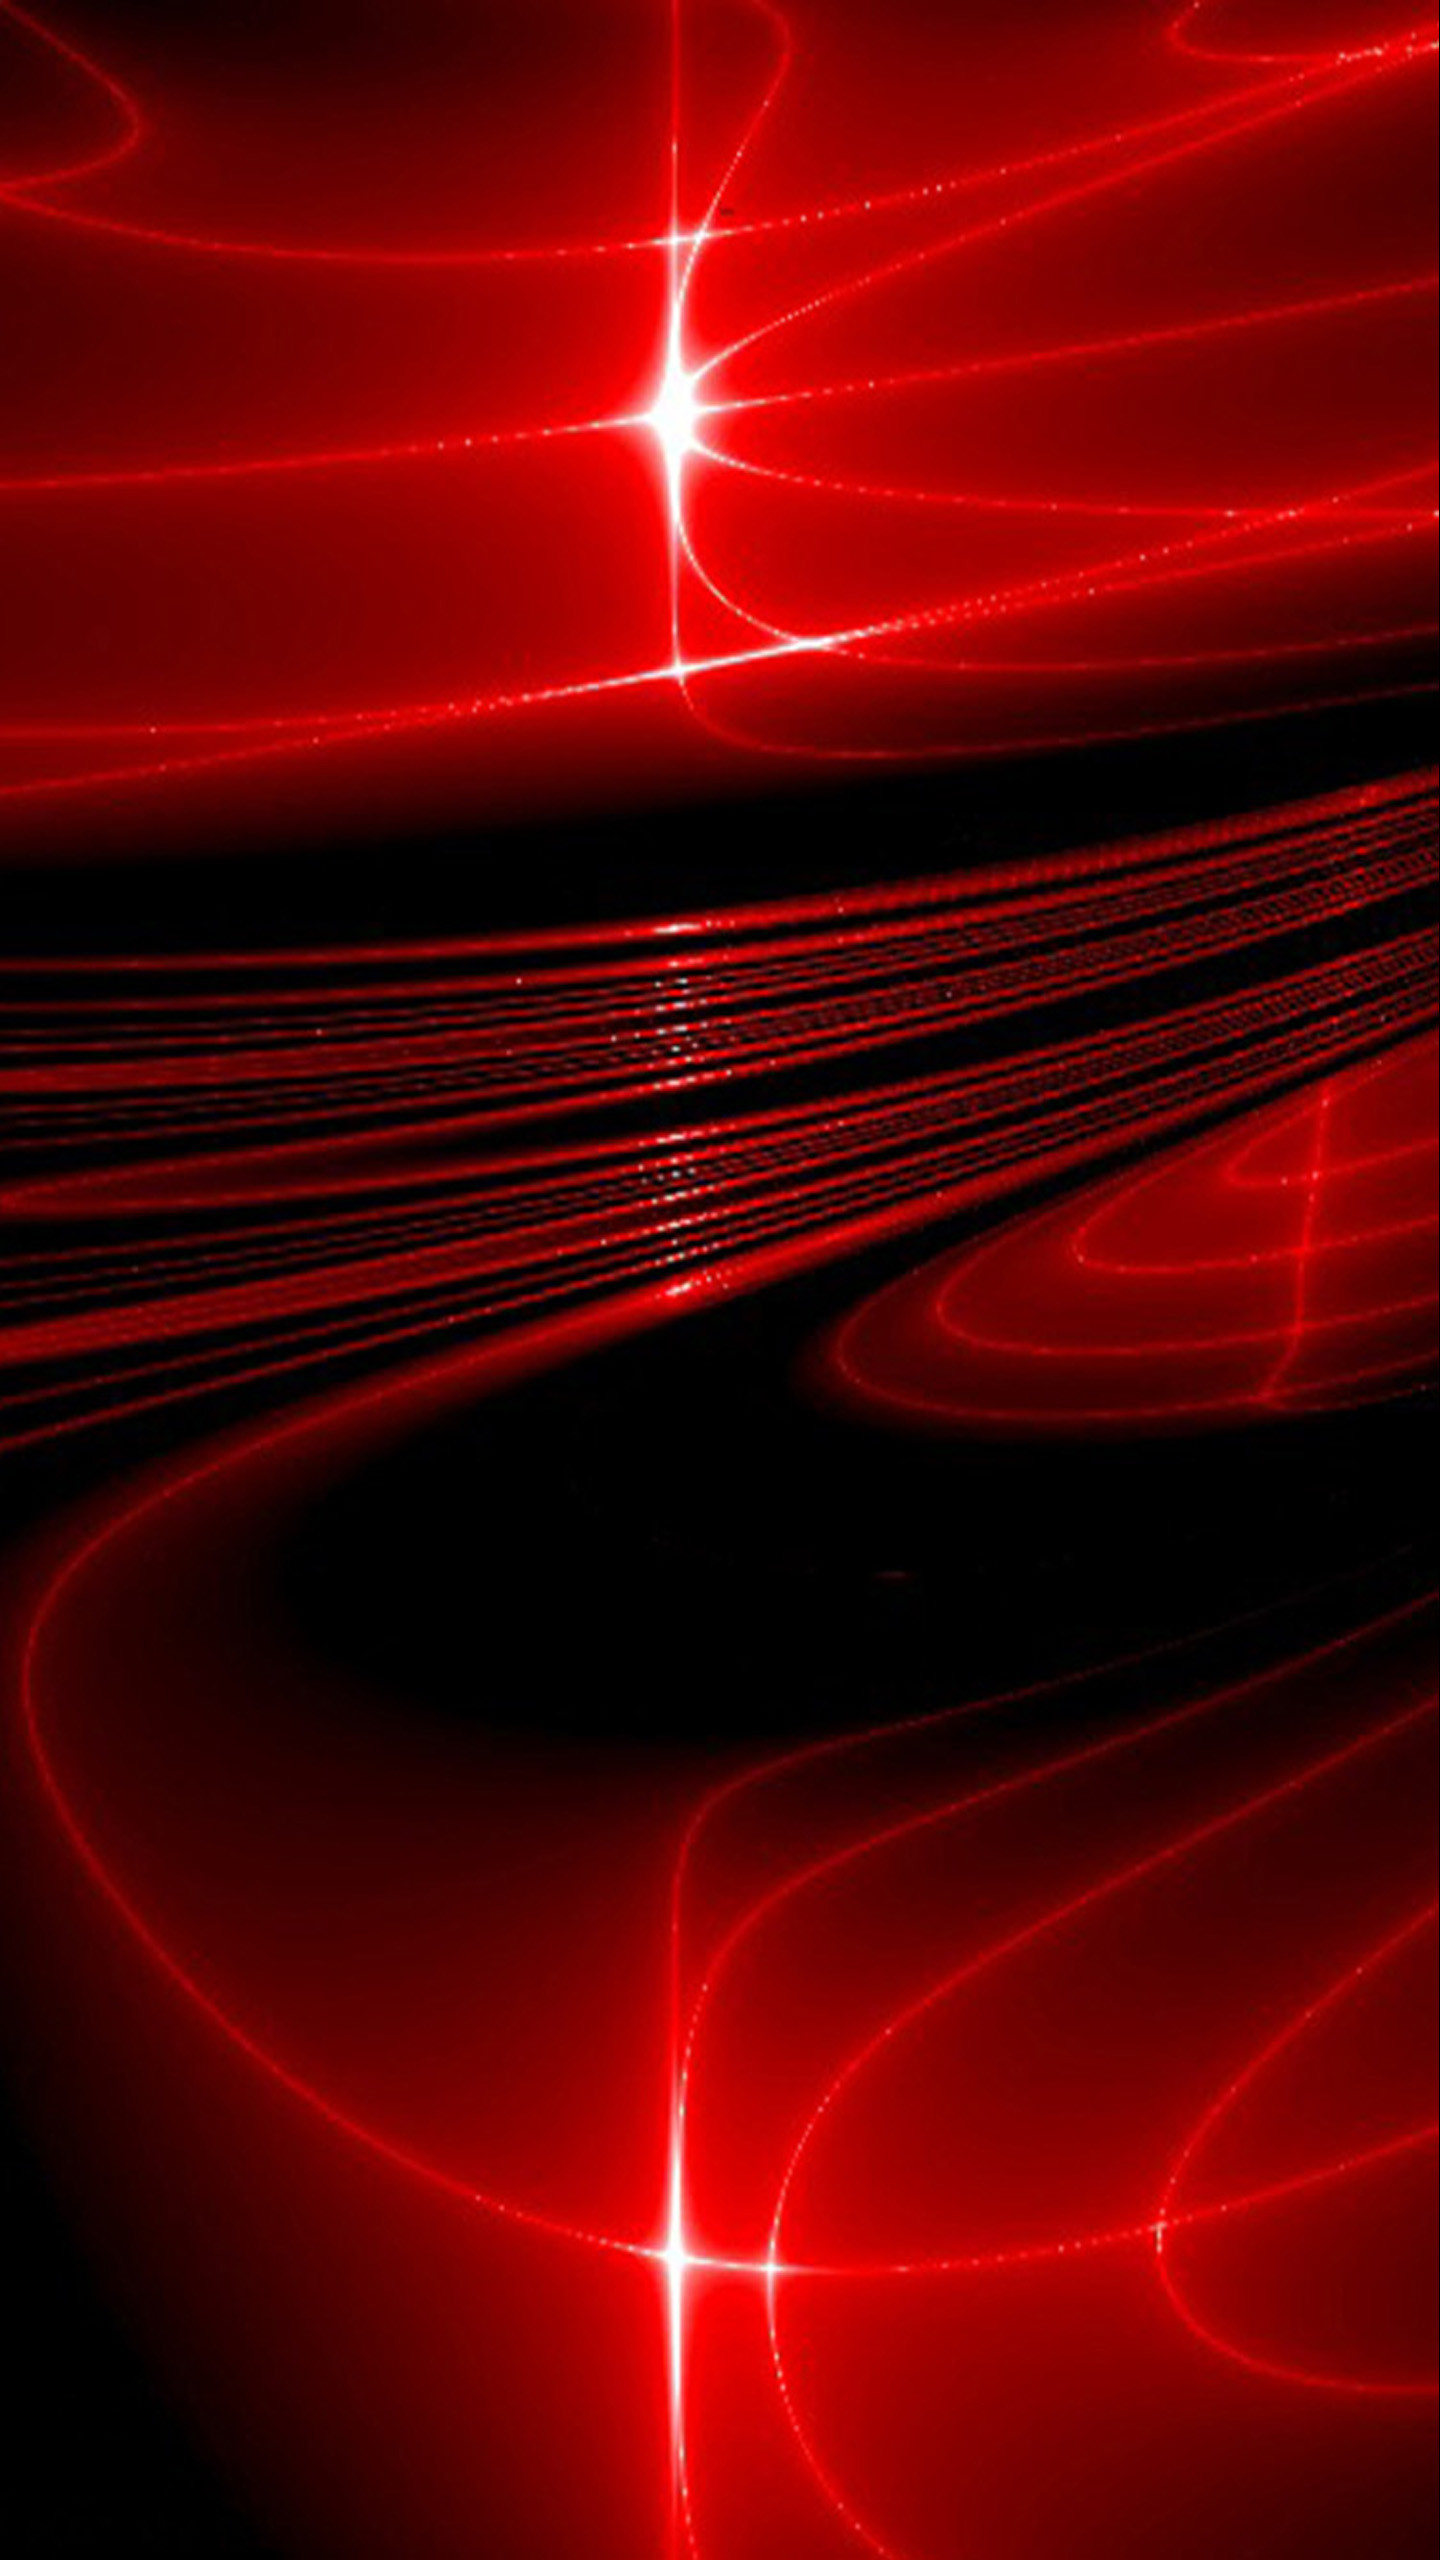 Red Galaxy Wallpapers